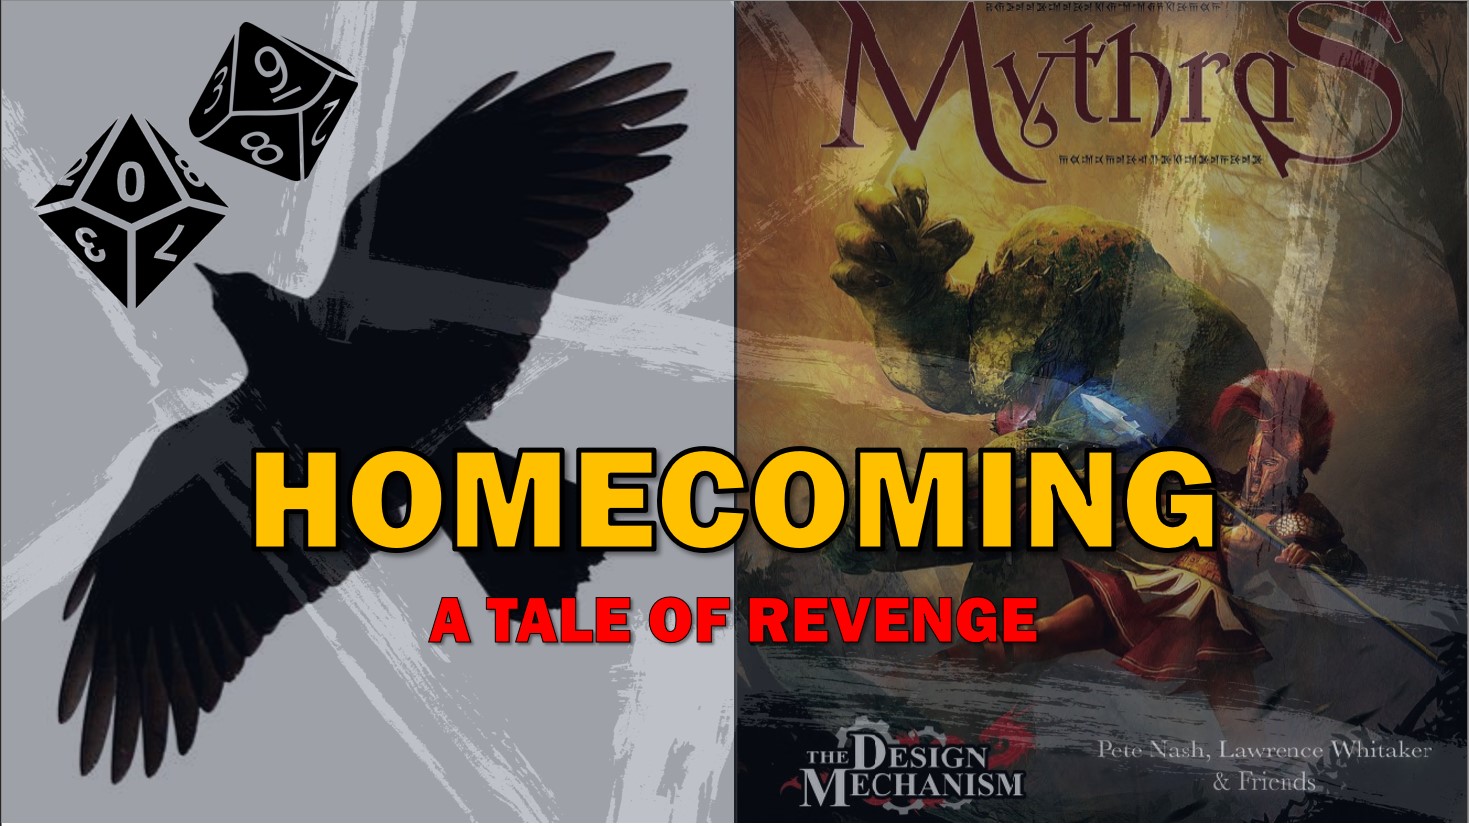 Homecoming: A Tale of Vengeance (Mythras)